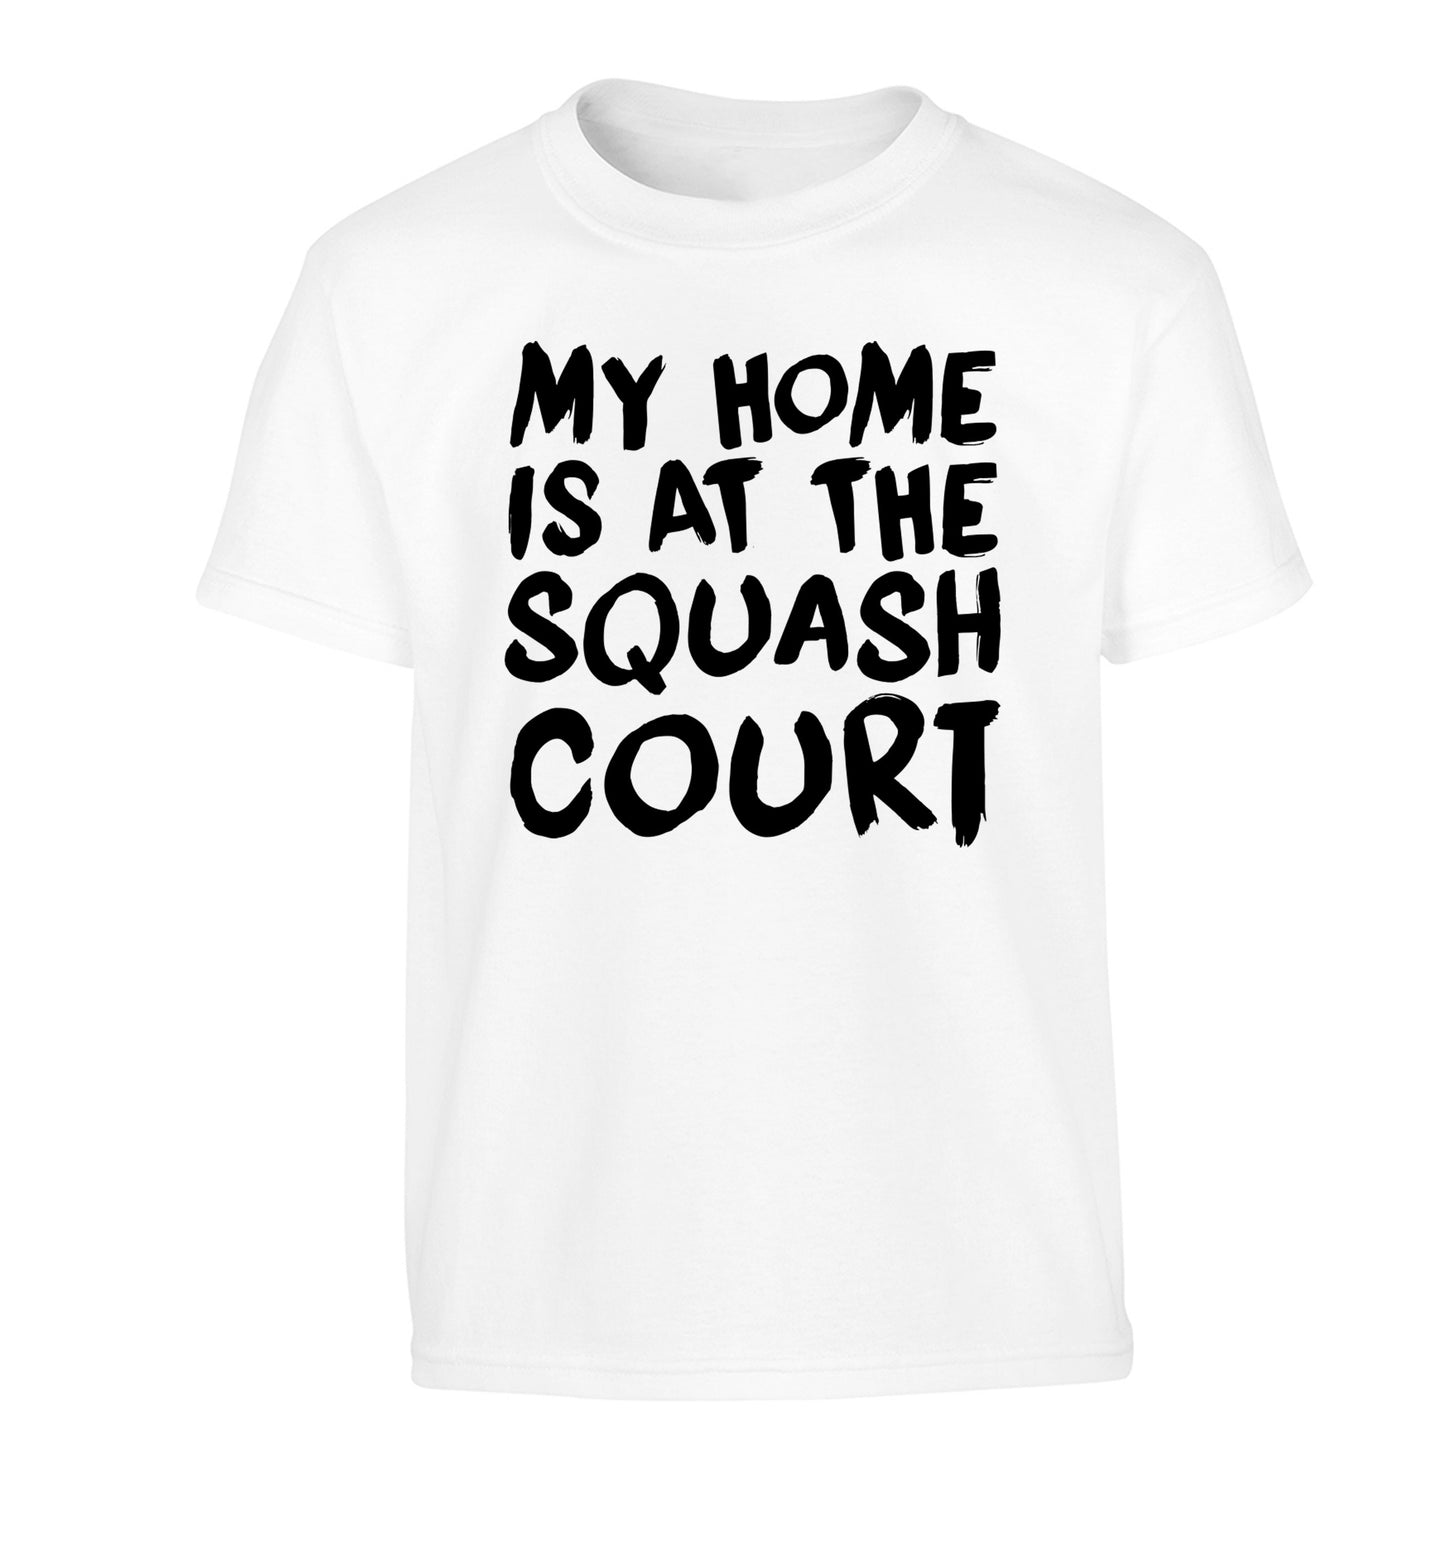 My home is at the squash court Children's white Tshirt 12-14 Years